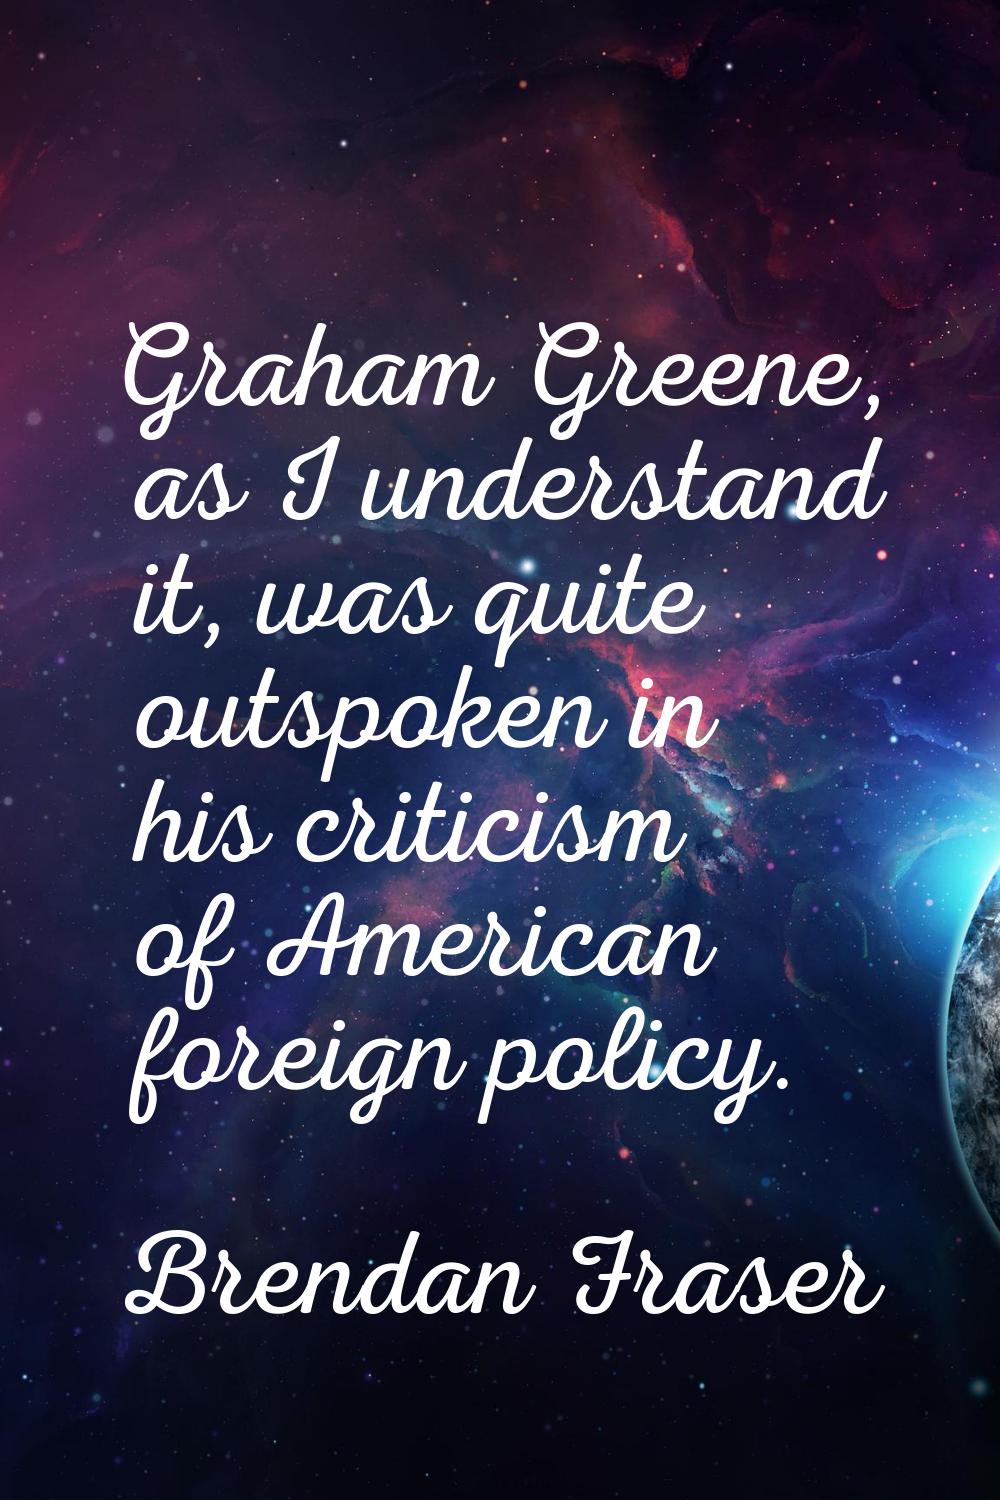 Graham Greene, as I understand it, was quite outspoken in his criticism of American foreign policy.